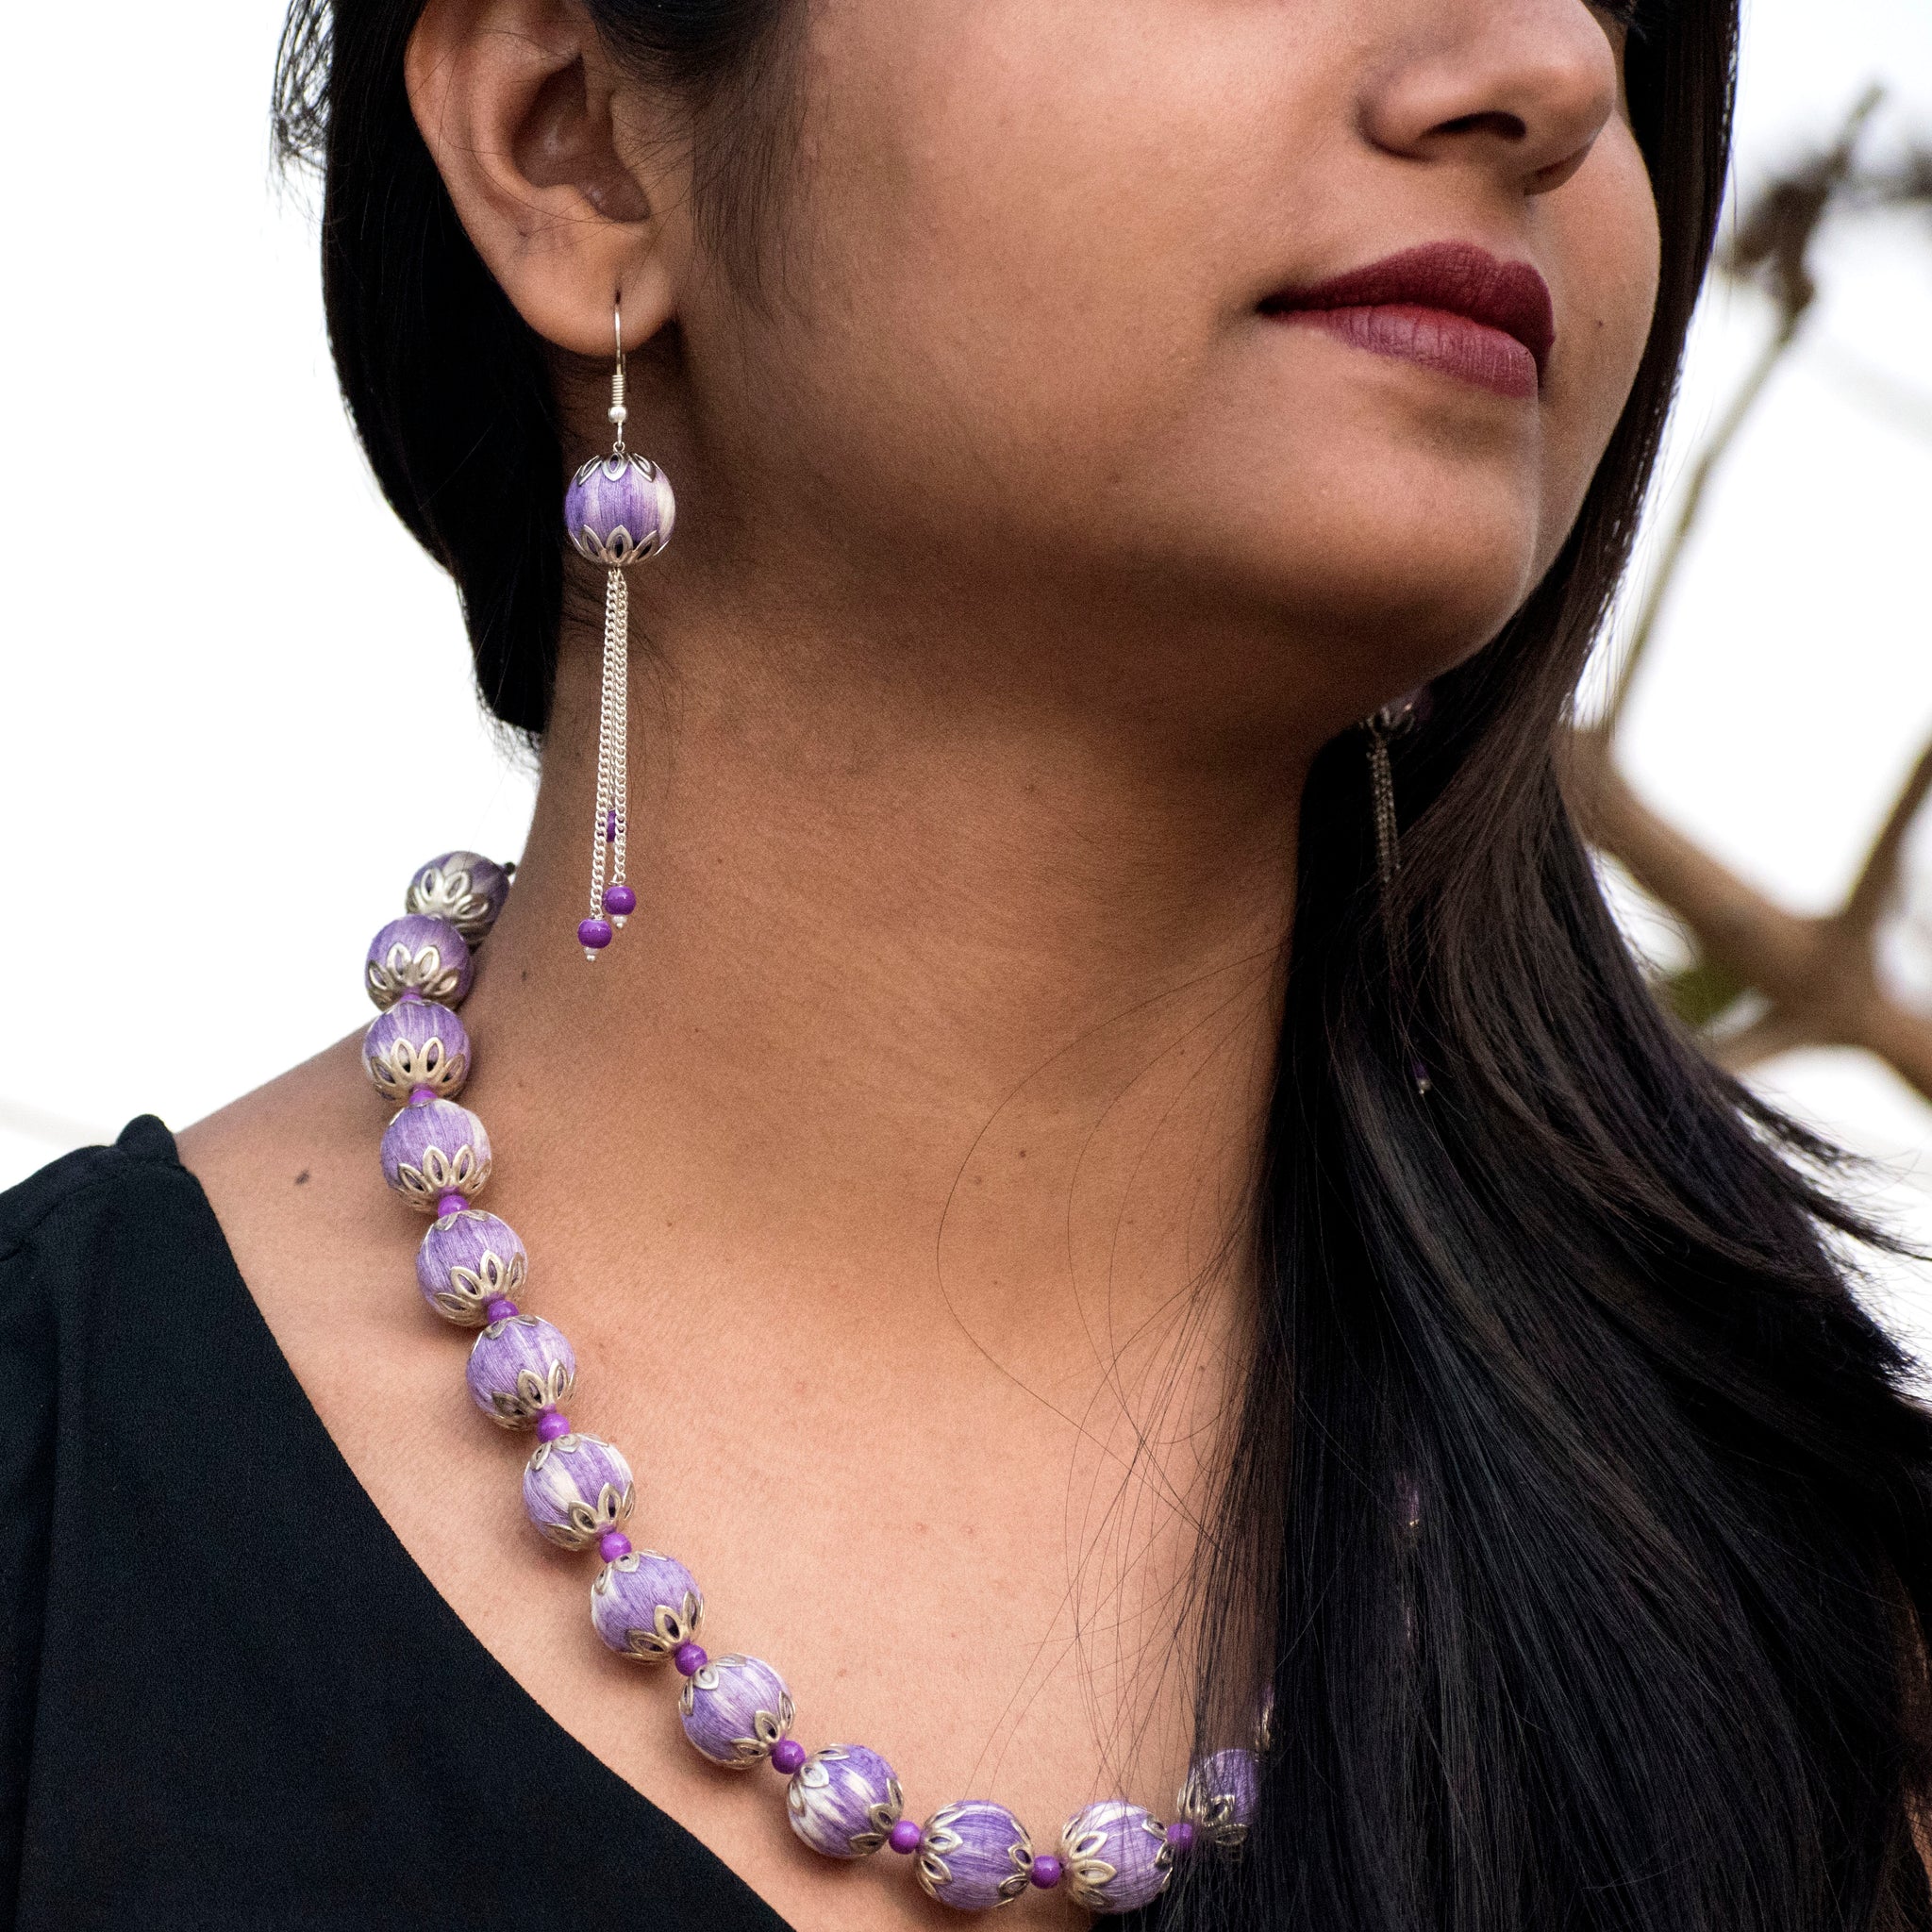 3 Layer Purple Glass Beads Necklace Set with Metal Detailing – A Local Tribe